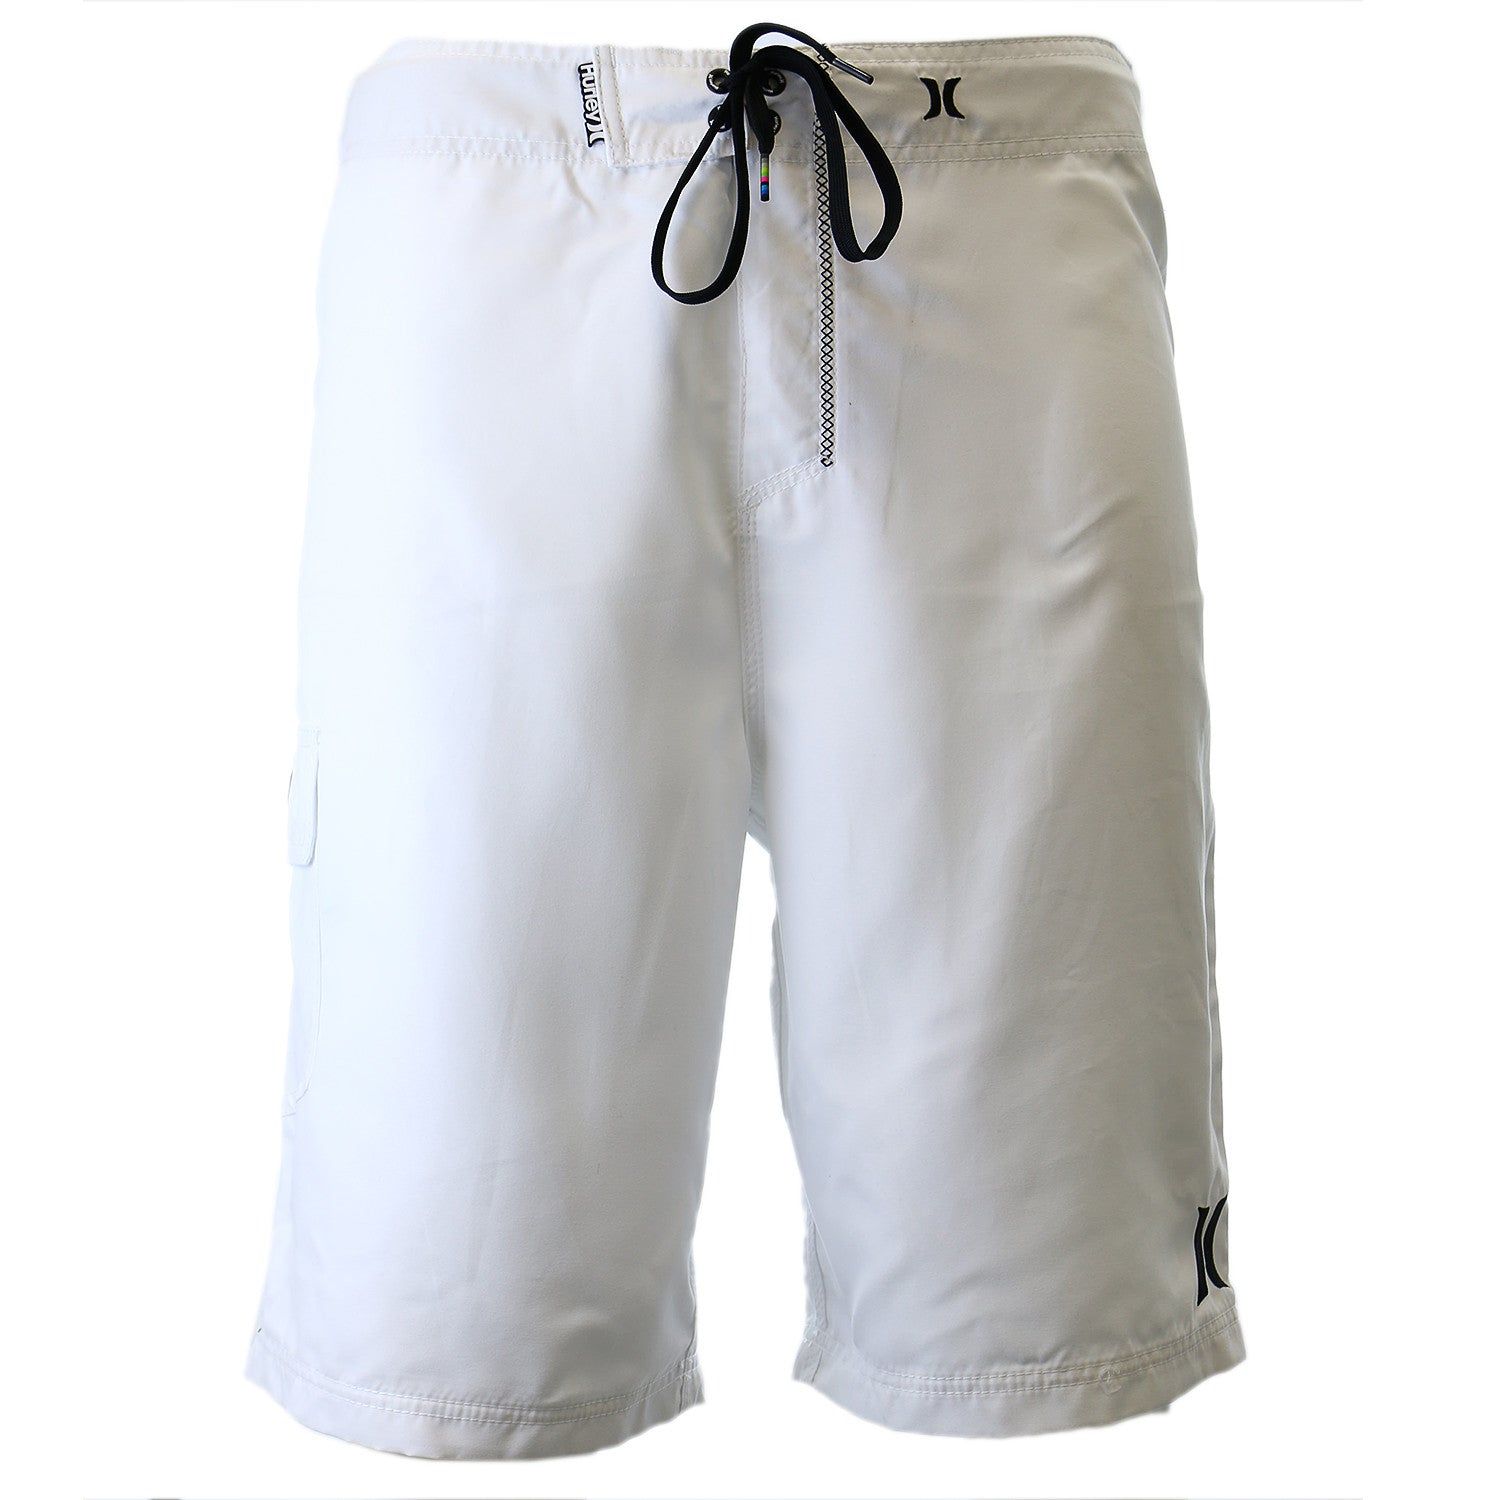 Hurley One and Only 22-Inch Boardshort - Men's - Shoplifestyle